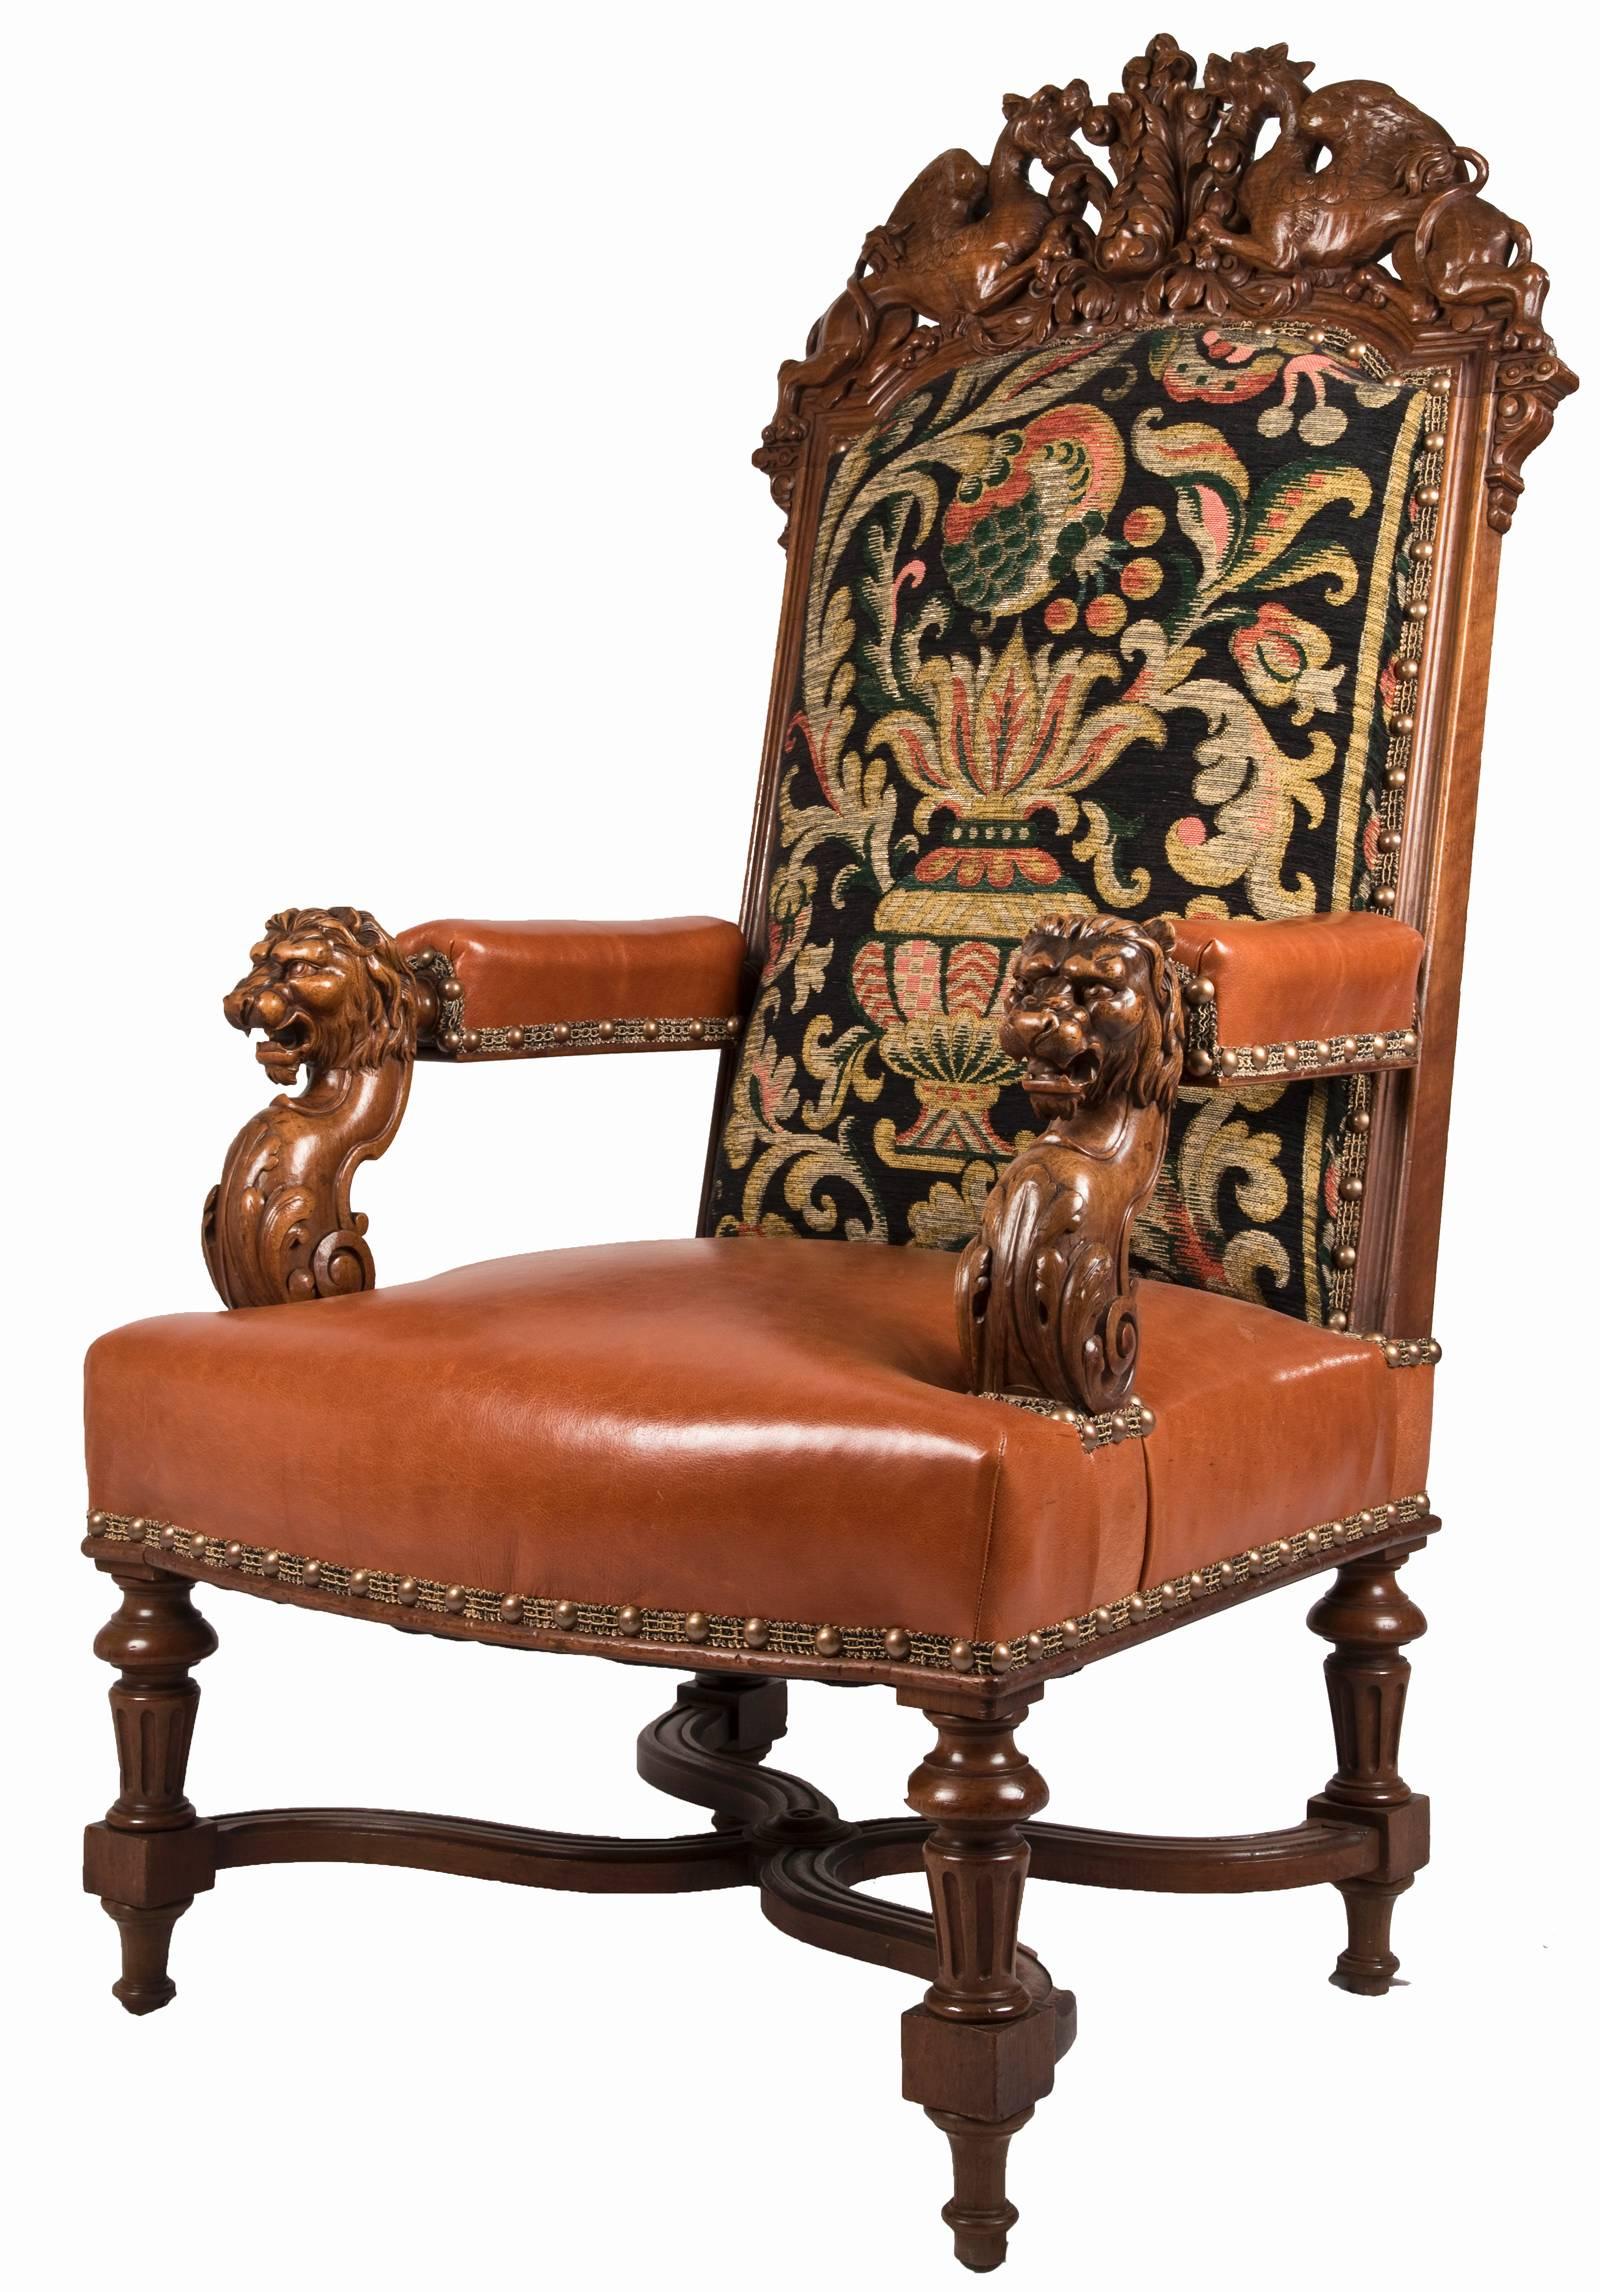 A pair of Louis XIV style fauteuil walnut chairs with a carved griffin crest, gros-point upholstered back and leather seat and arm rests with spaced brass stud trim, terminating in carved lion heads, and sitting on turned legs with an x-frame